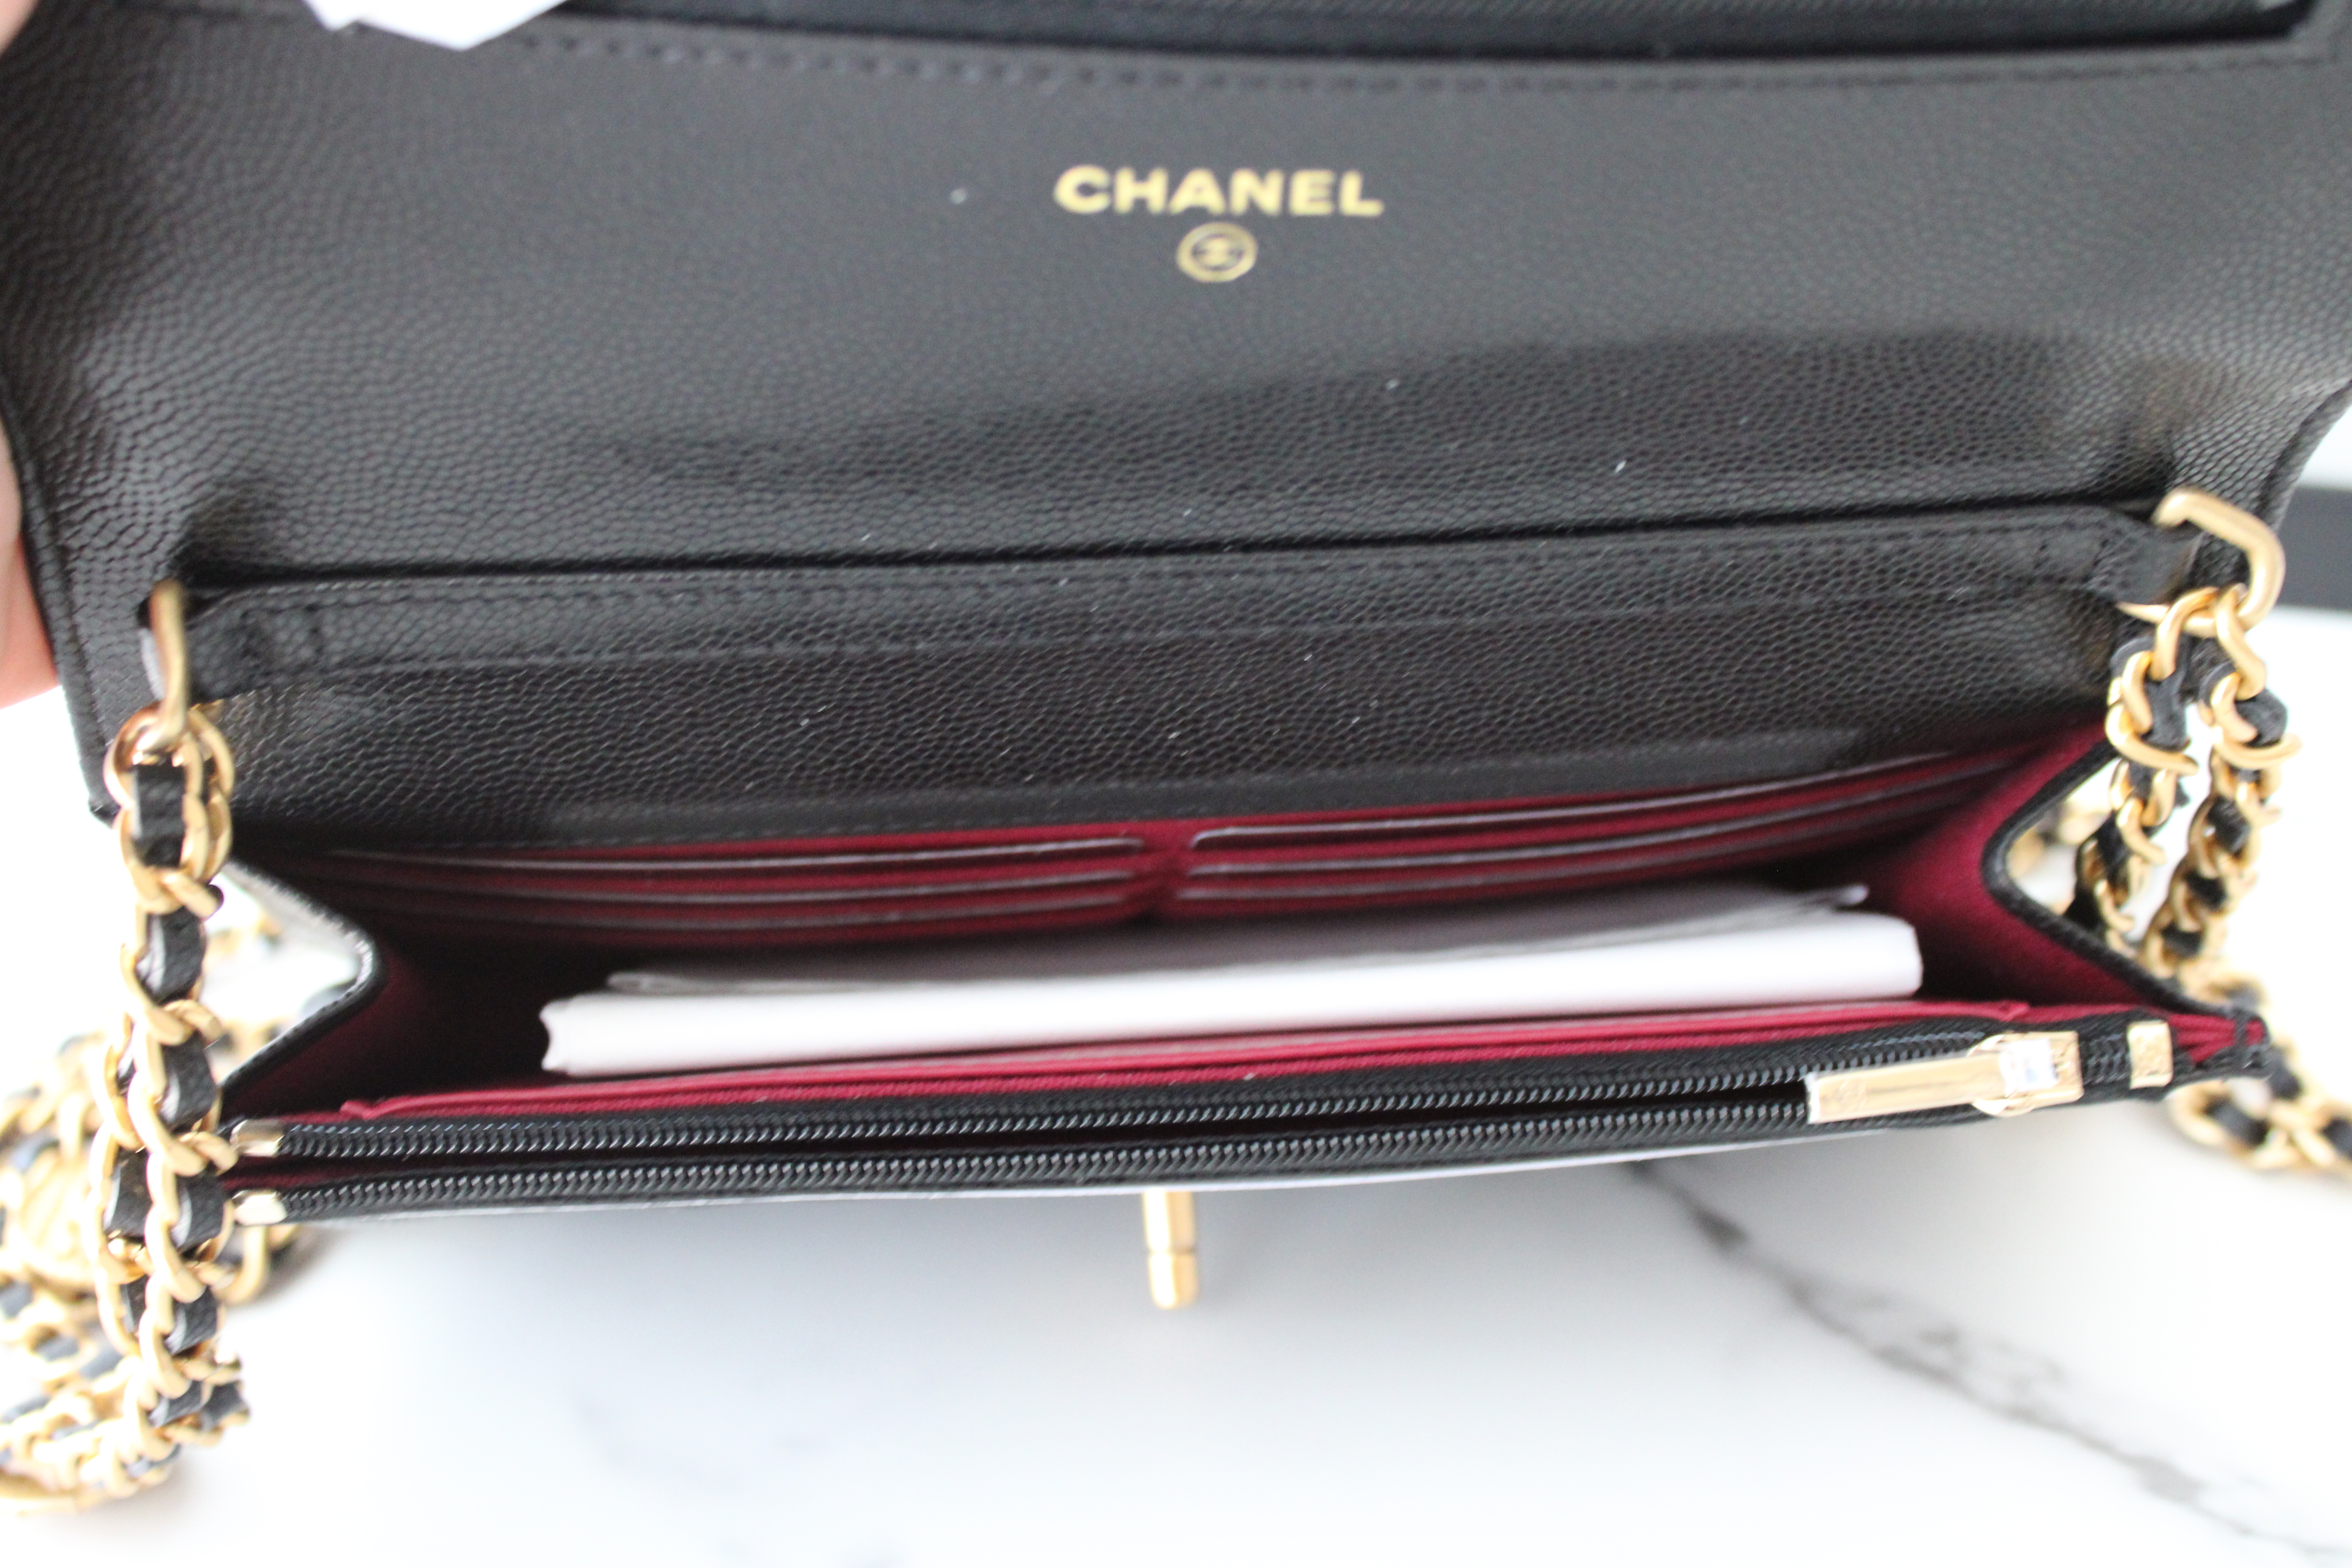 * BOSTON Chanel Wallet on Chain, 22A Black Caviar Leather, New in Box